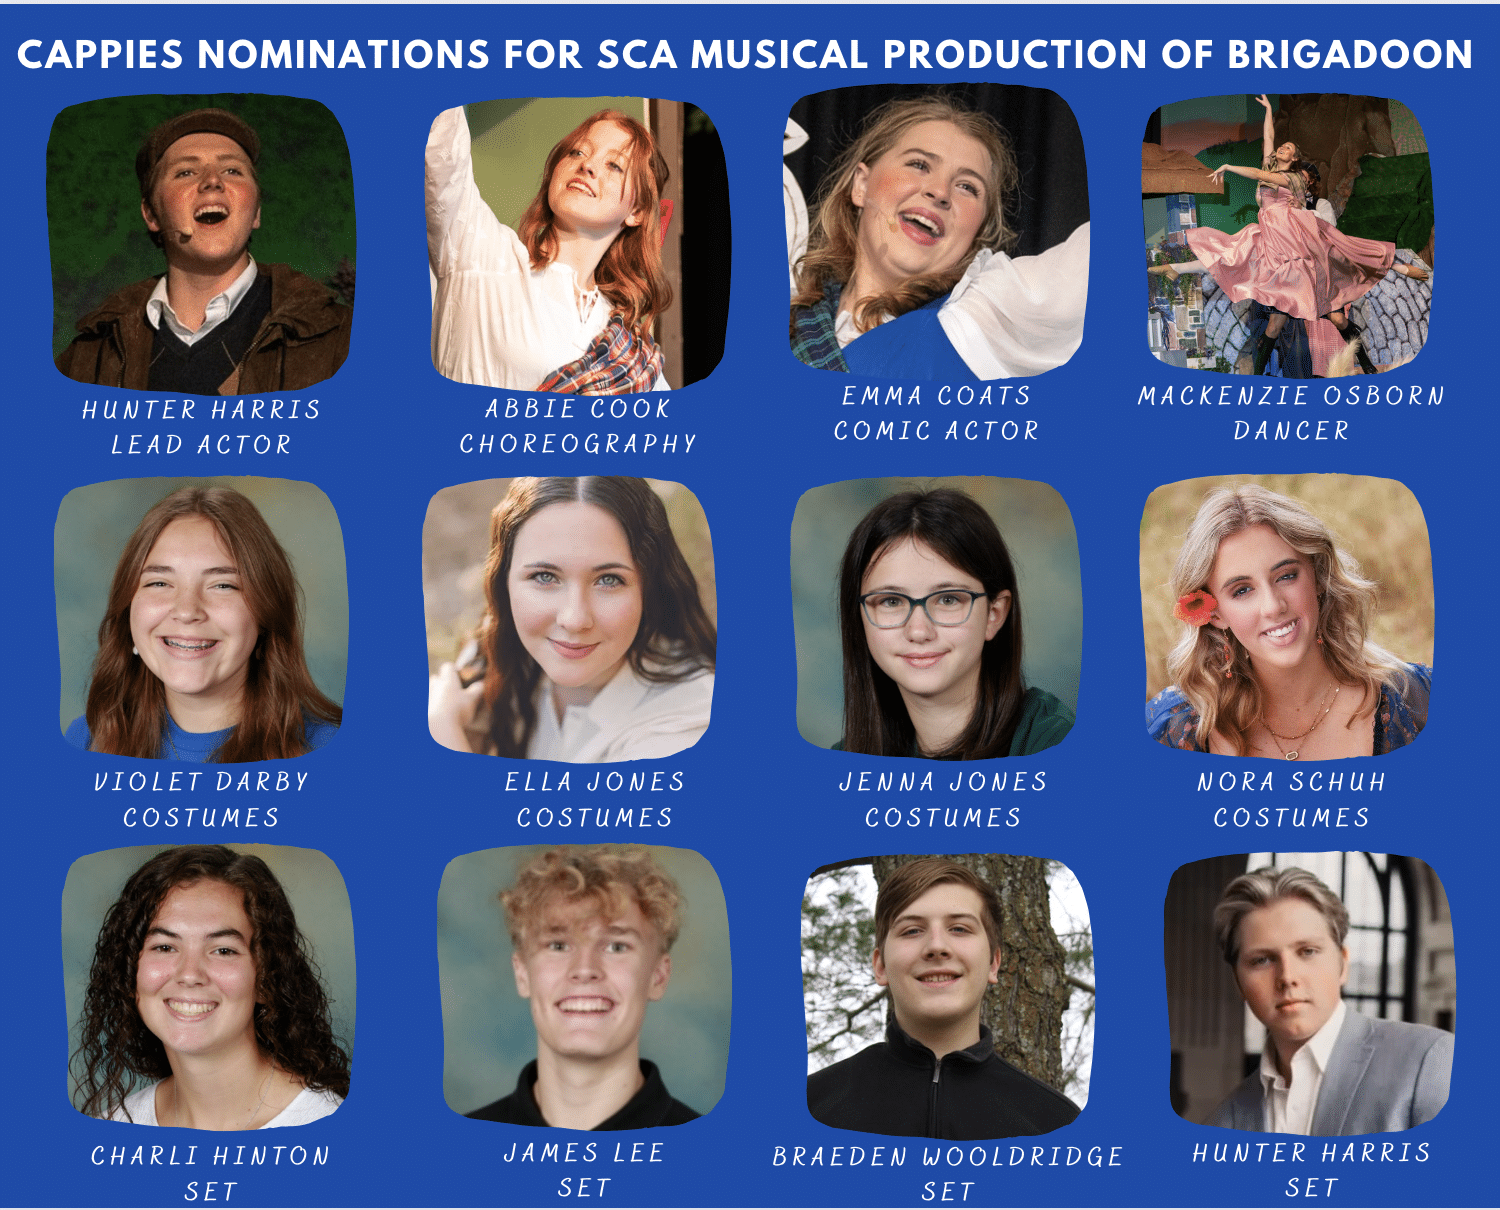 SCA Theatre Department Cappies nominations for the SCA musical production of Brigadoon. Lead Actor in a Male Role in a Musical - Hunter Harris, Choreography for a Musical - Abbie Cook, Comic Actor in a Female Role in a Musical - Emma Coats, Dancer in a Female Role - Mackenzie Osborn, Costumes for a Musical -Violet Darby, Ella Jones, Jenna Jones & Nora Schuh and Sets for a Musical - Hunter Harris, Charli Hinton, James Lee & Braeden Wooldridge.